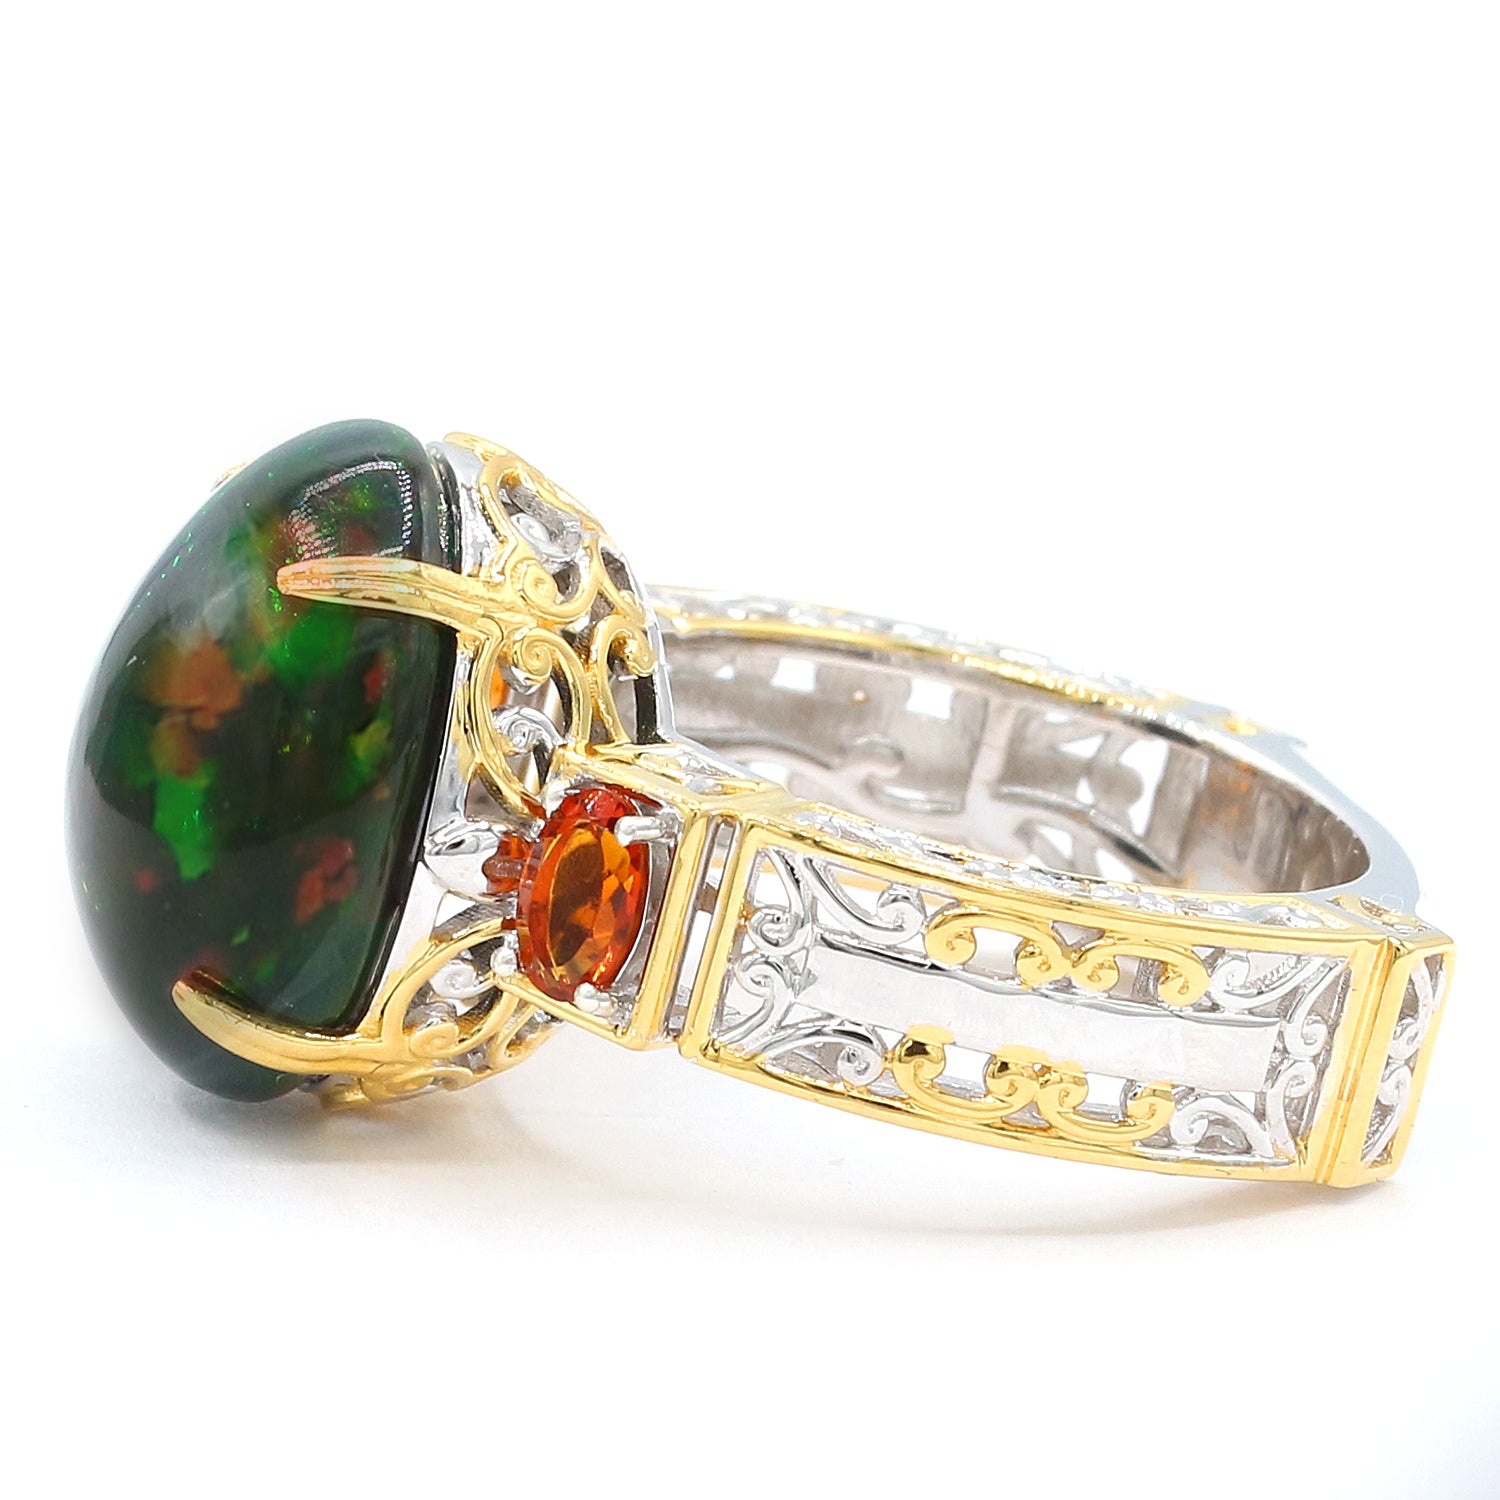 Limited Edition Gems en Vogue Luxe, One-of-a-Kind 8.16ctw Black Ethiopian Opal & Madeira Citrine Ring